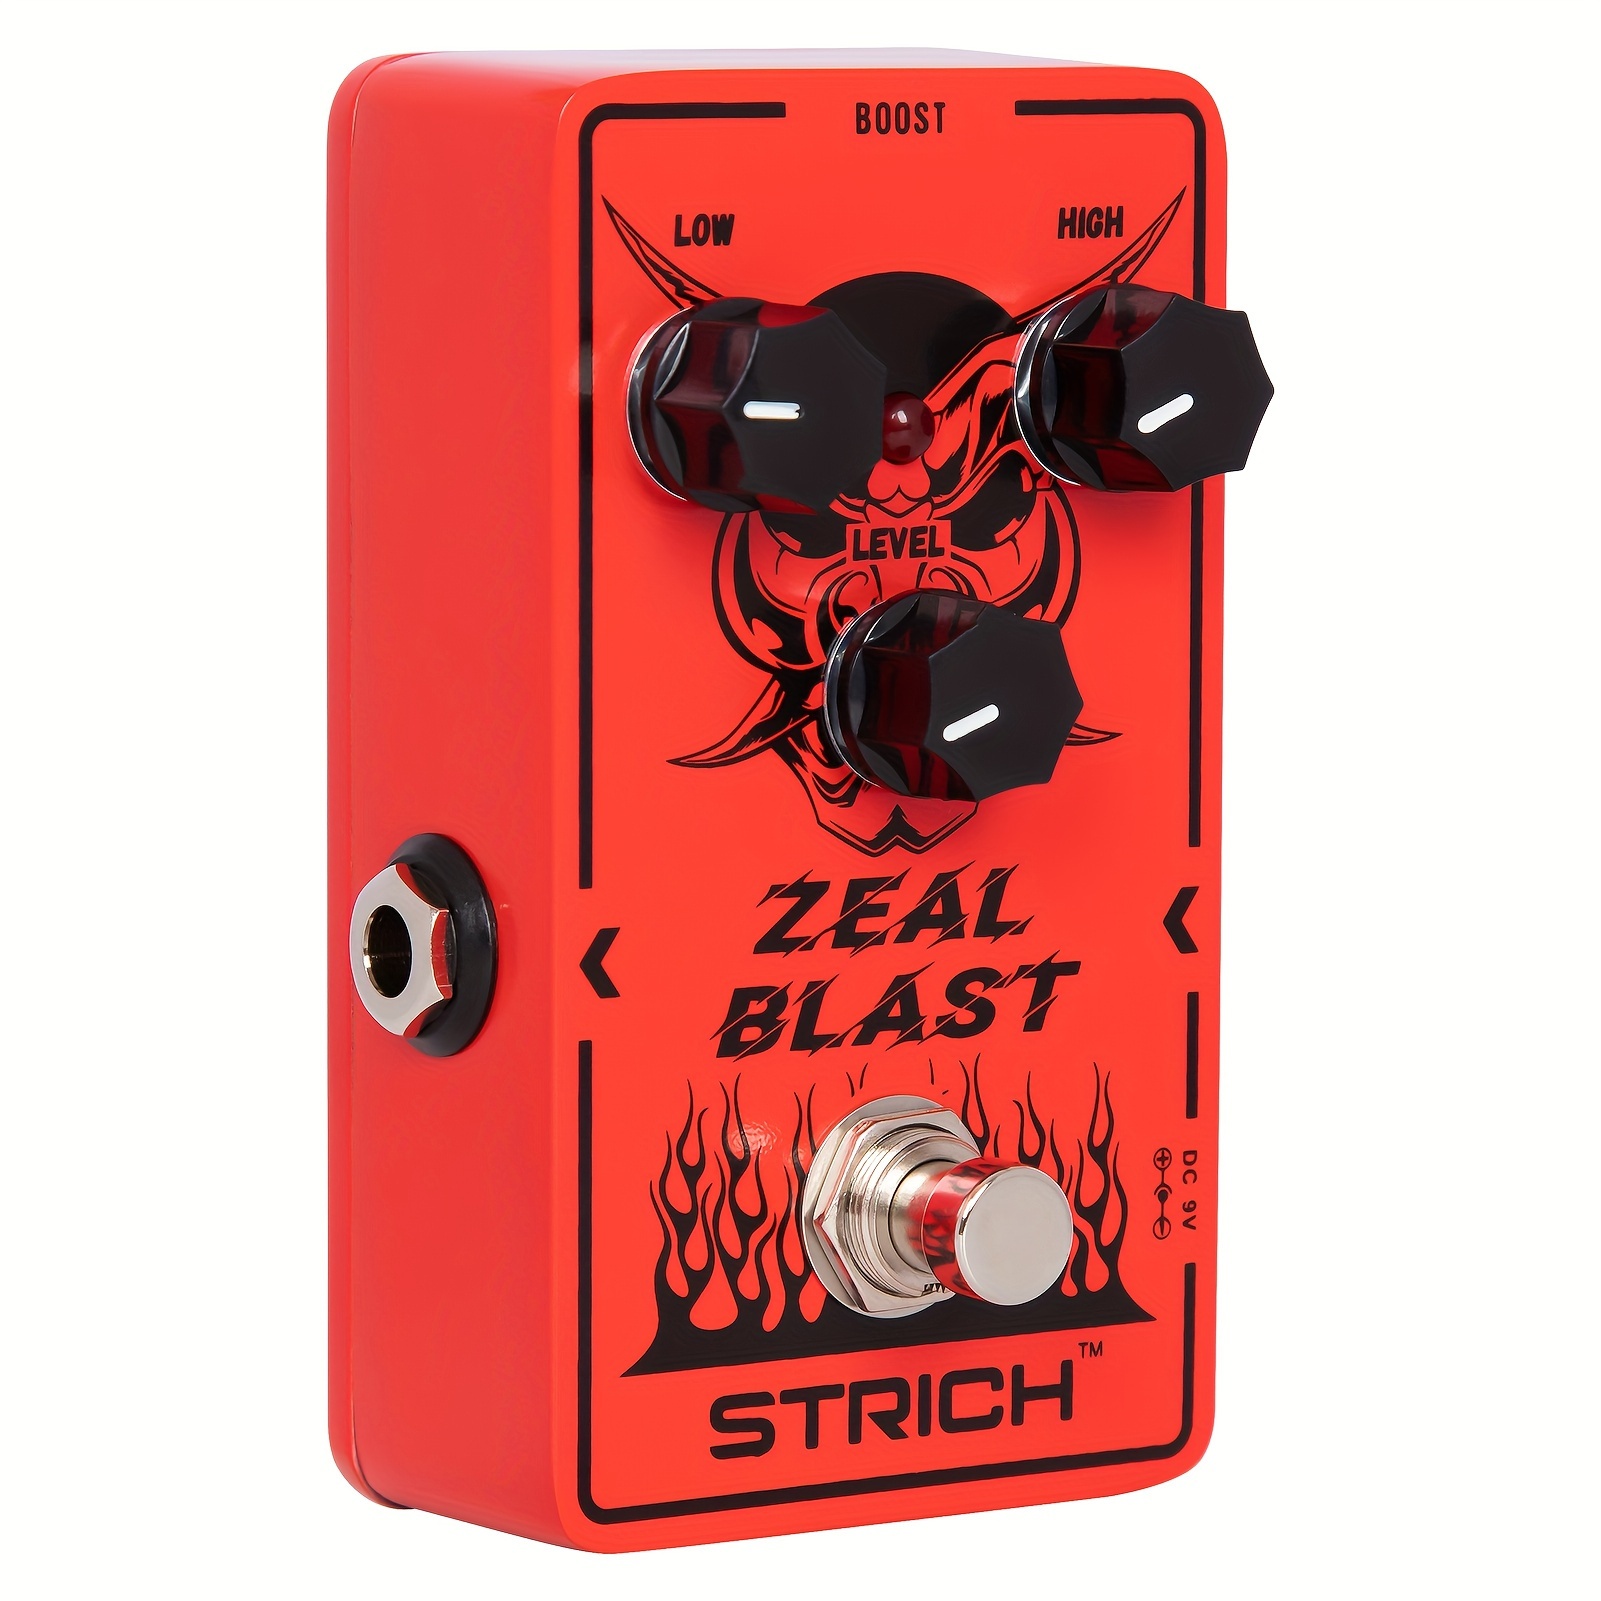 

Strich Blast Boost Guitar Pedal, Enhance Your Guitar Bass Sound With 2-band Low/high Adjustment, True Bypass For Electric Guitar, Red And Black